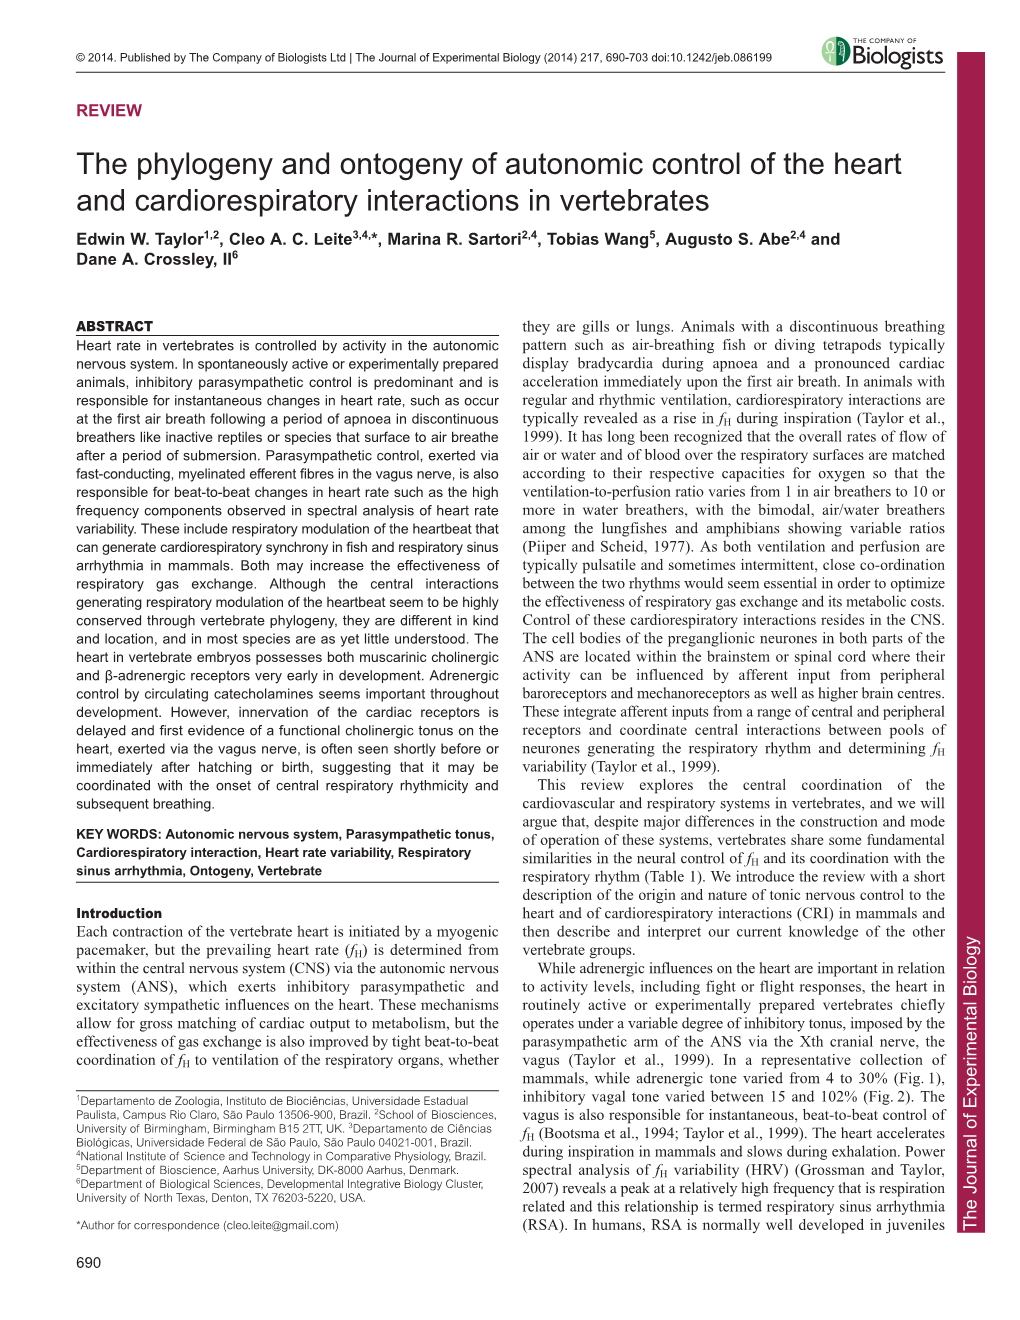 The Phylogeny and Ontogeny of Autonomic Control of the Heart and Cardiorespiratory Interactions in Vertebrates